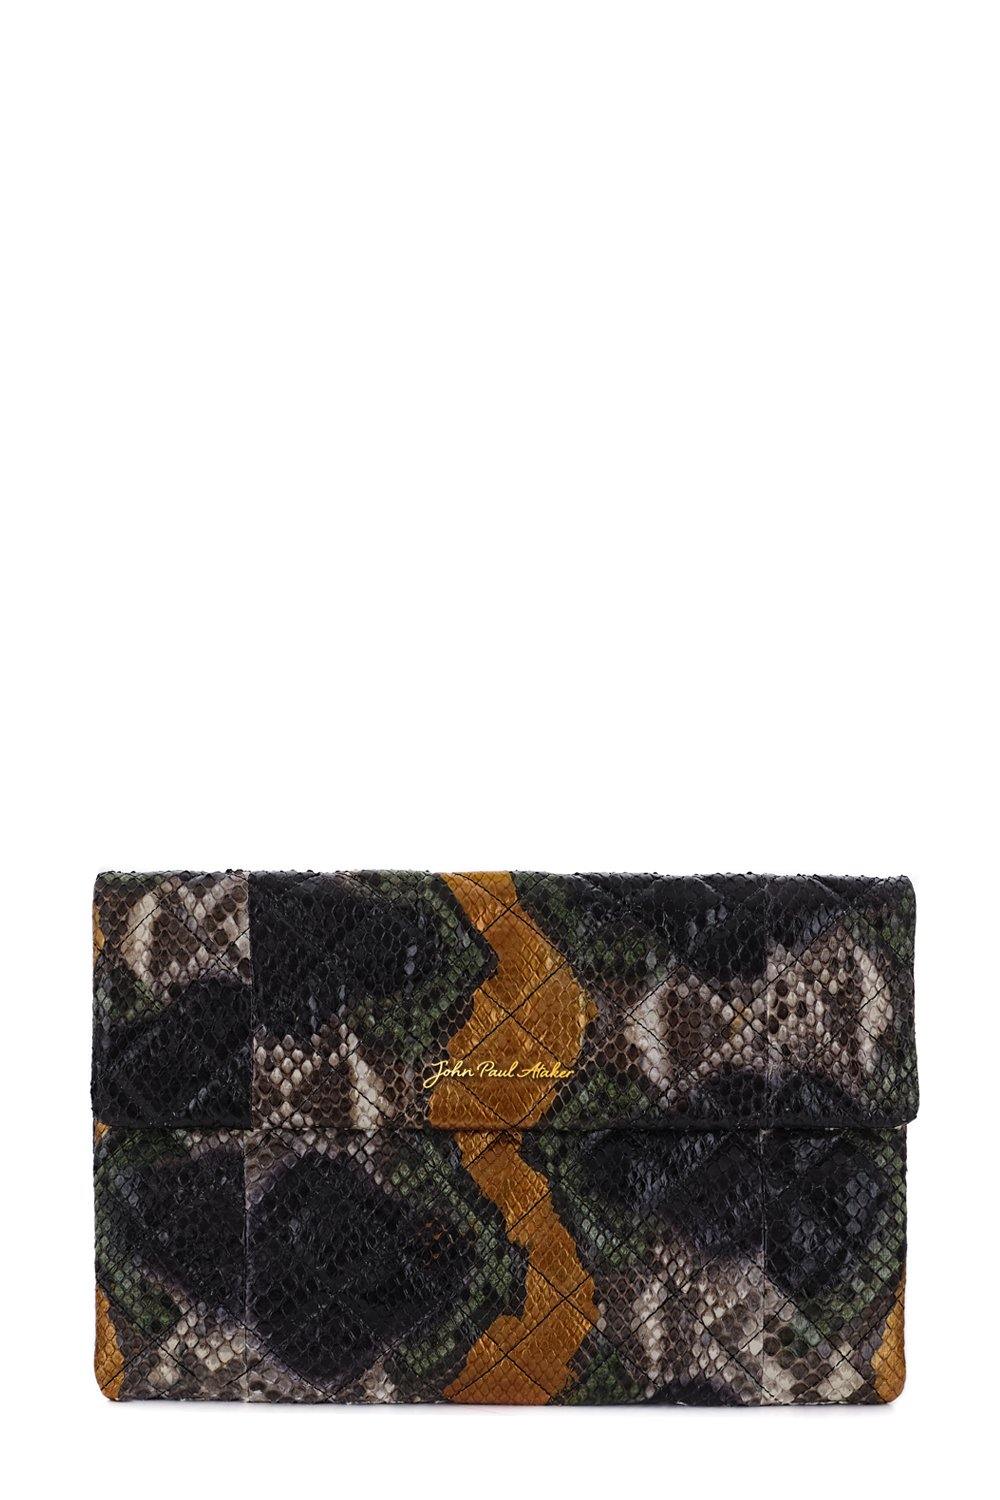 Quilted Envelope Clutch - John Paul Ataker